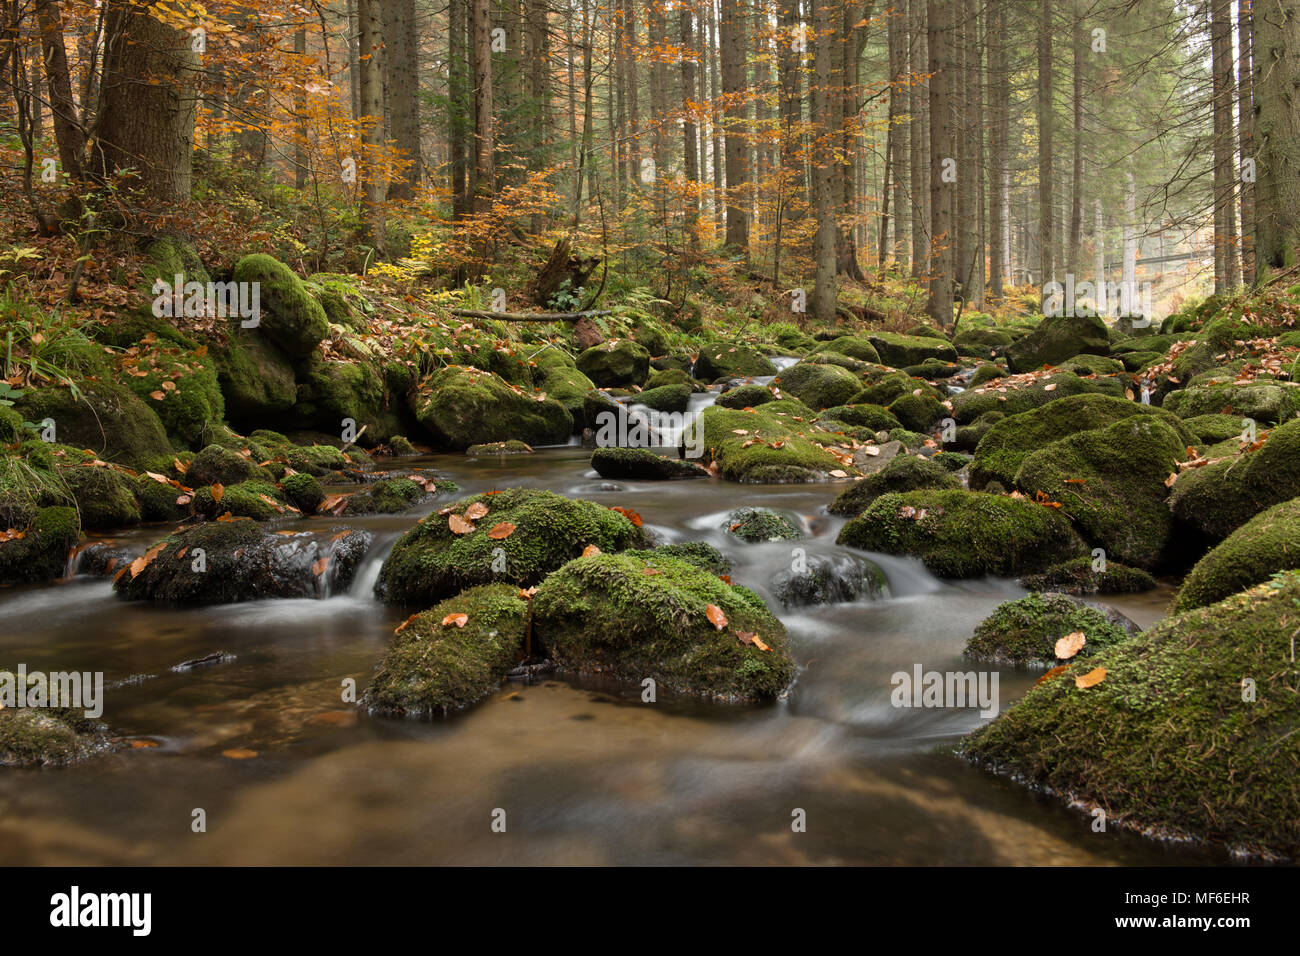 Autumn forest with trees and a river with rocks Stock Photo